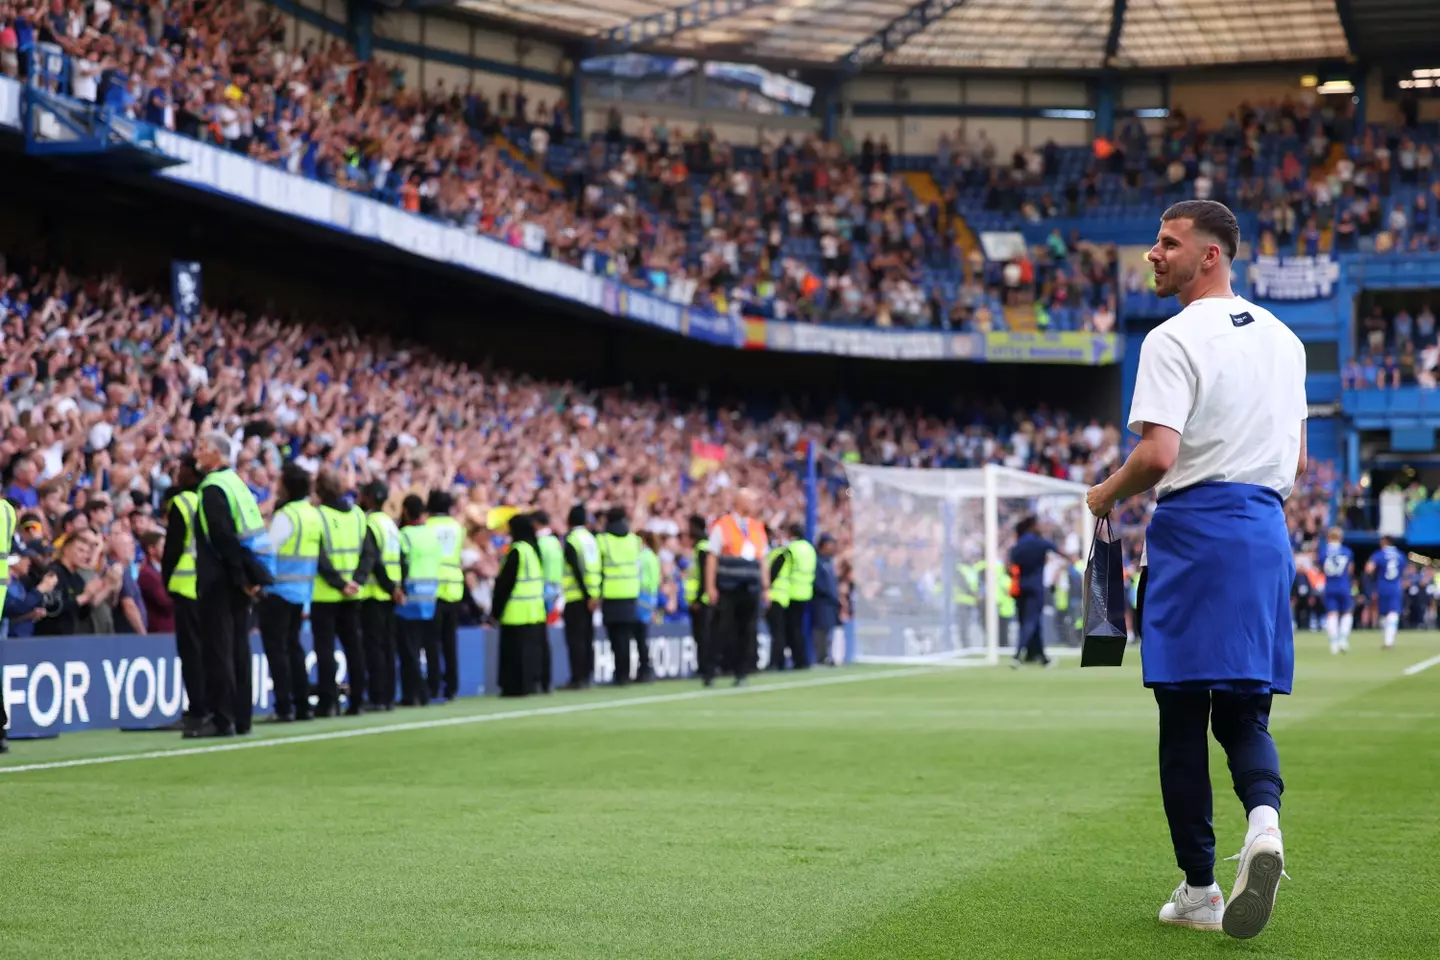 Mount appeared to say goodbye to the Stamford Bridge crowd after the game with Newcastle United. Image: Alamy